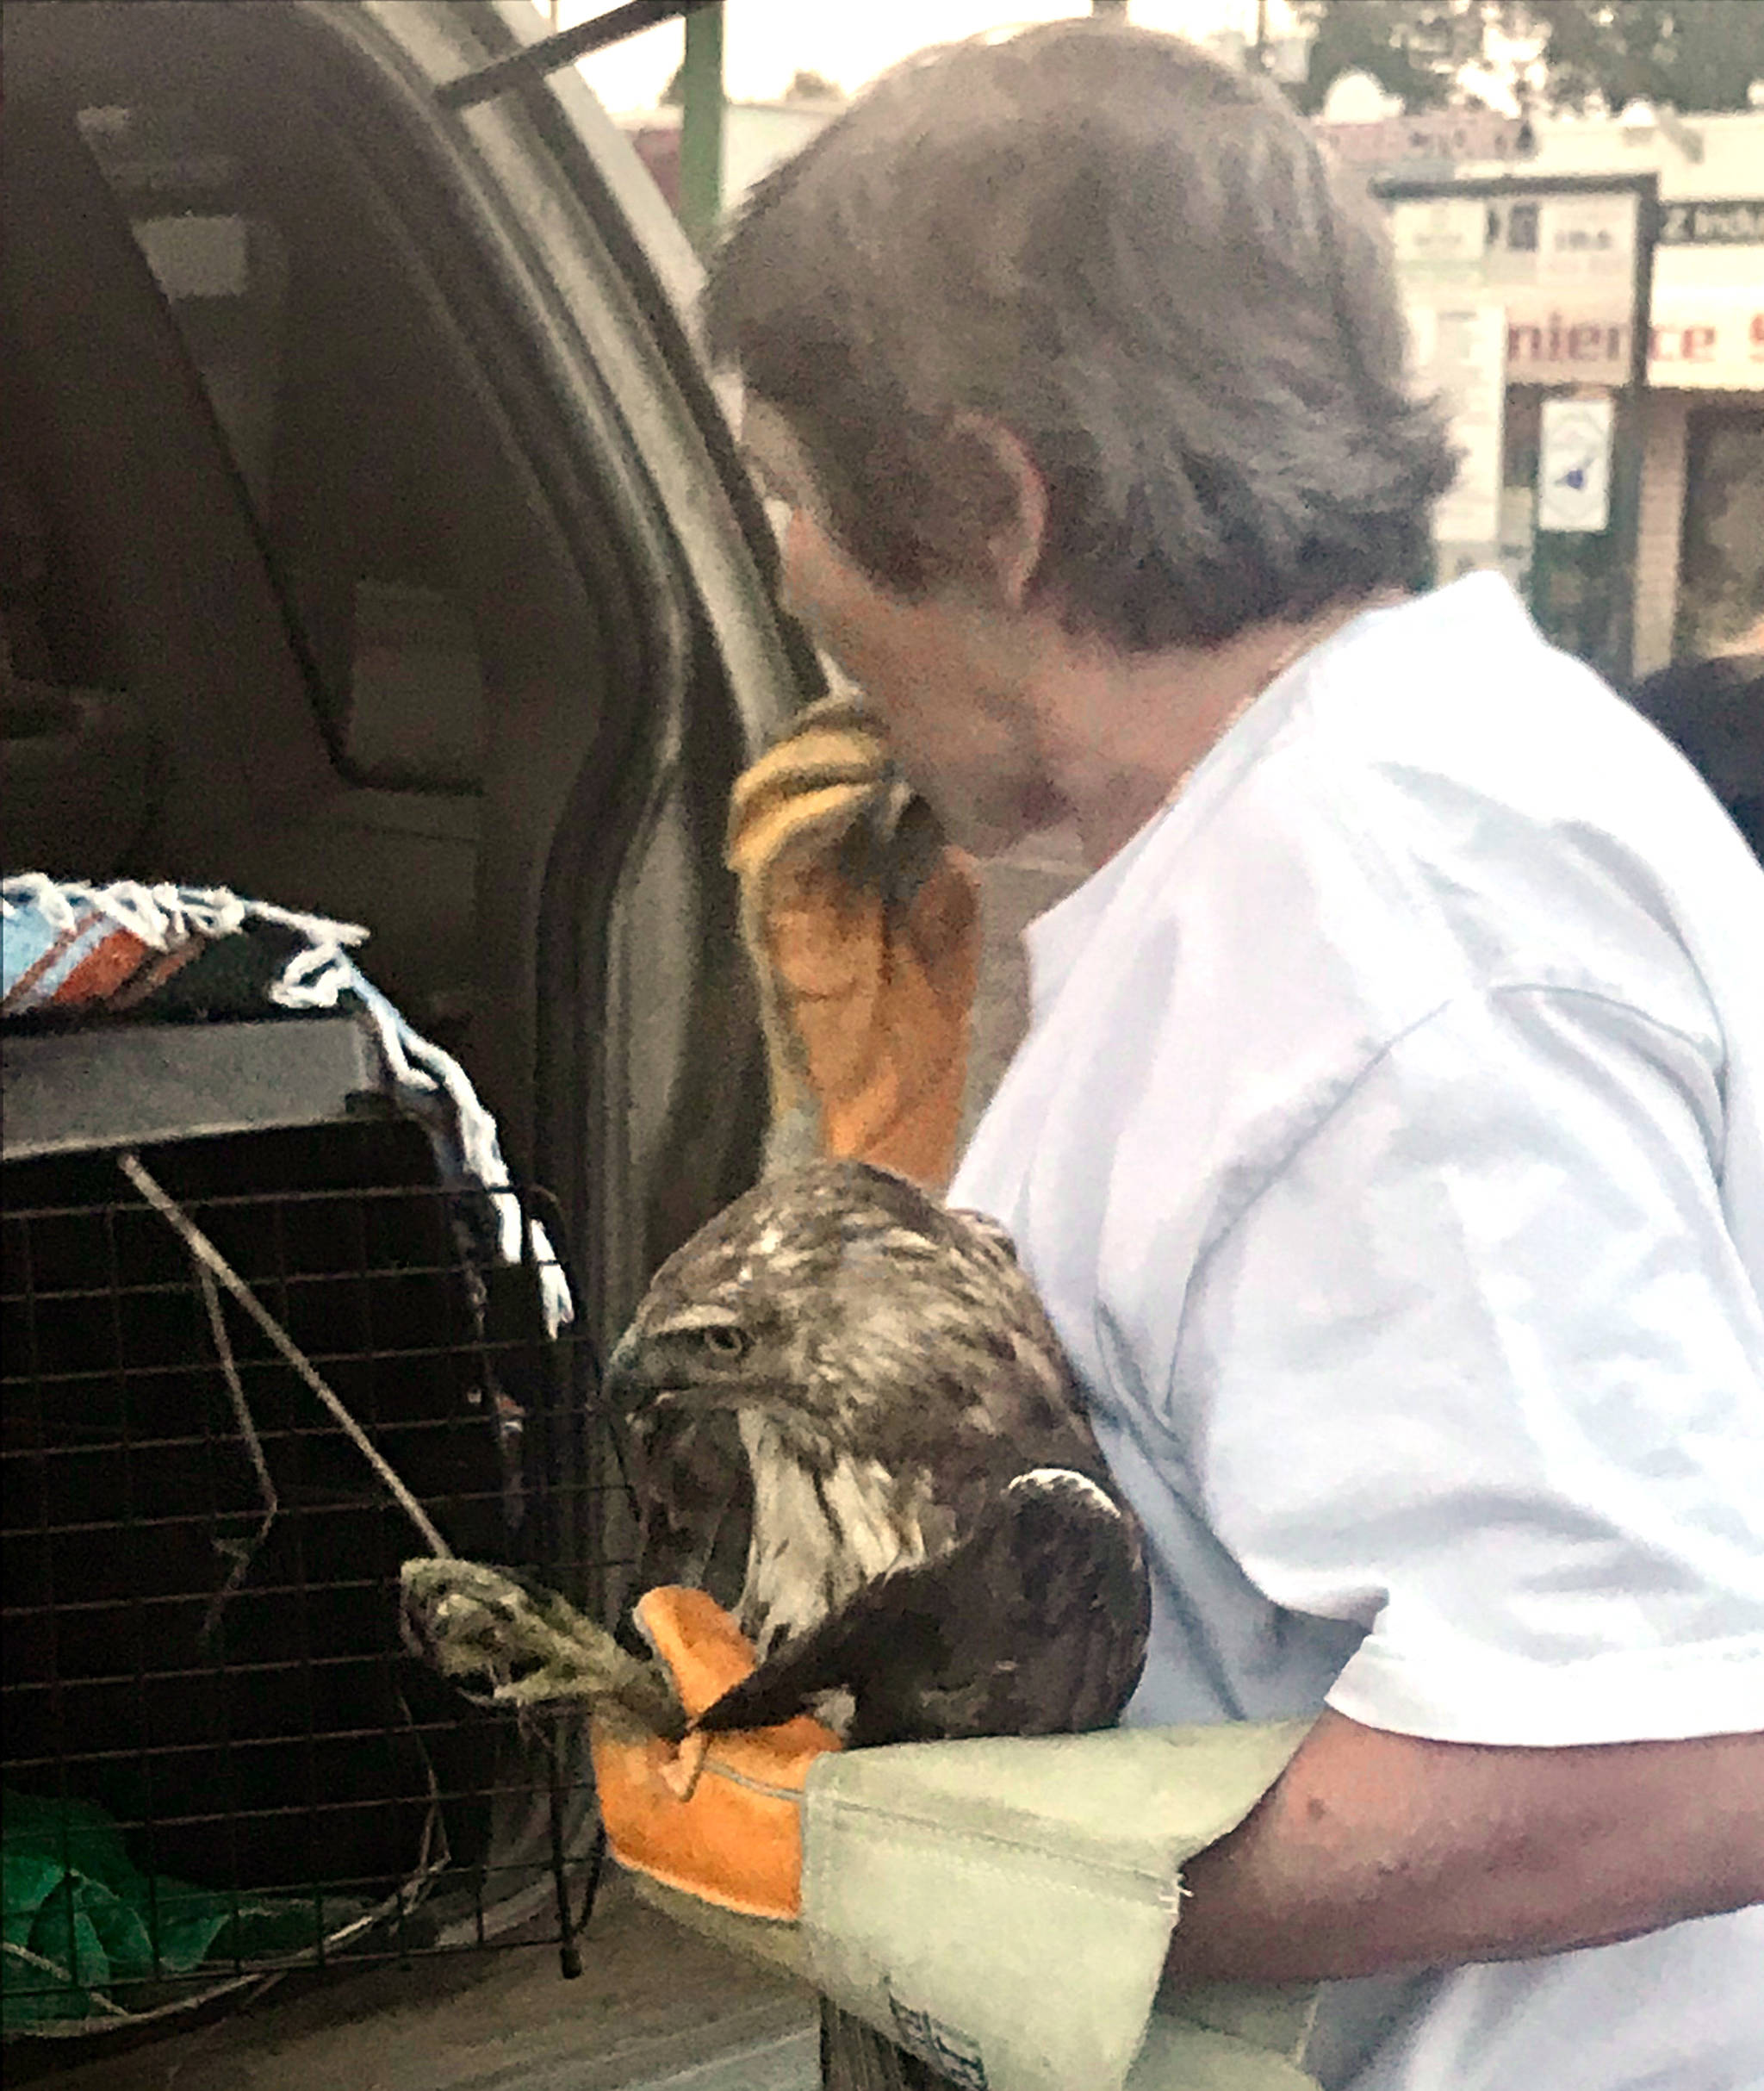 Judy Boyd, fostering researcher from Medicine River Wildlife Centre left Red Deer right after receiving the call about the injured hawk. (Contributed photo)